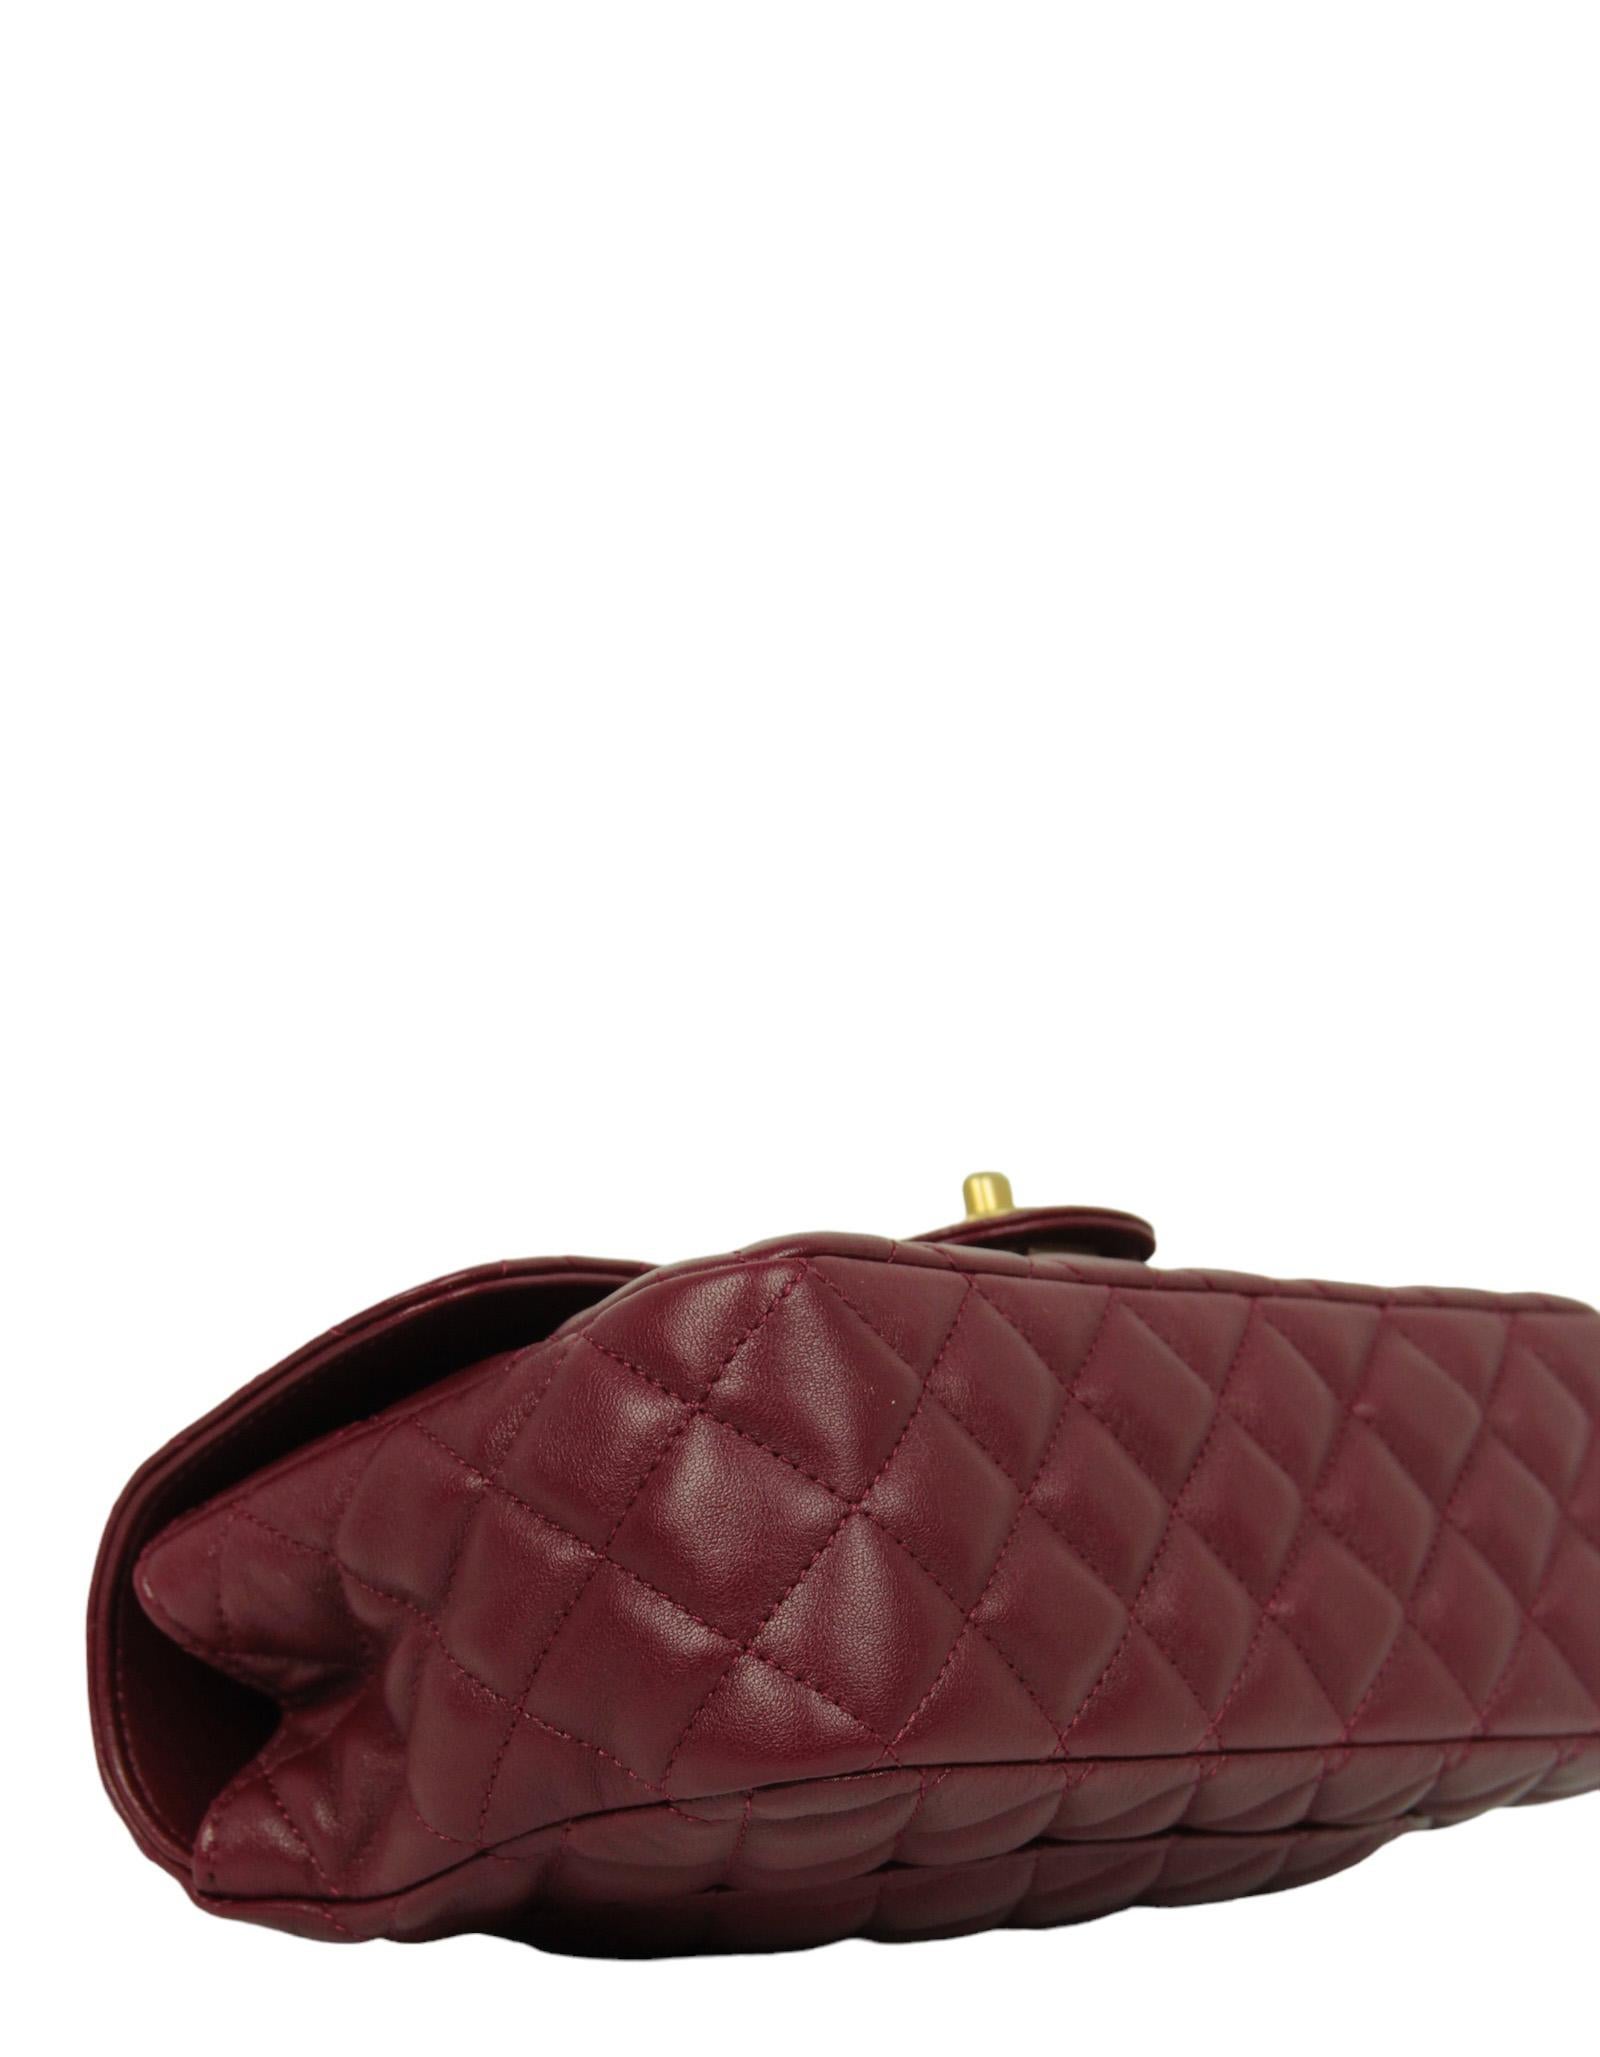 Women's Chanel Burgundy Lambskin Leather Quilted Flapbag w/ Handle For Sale